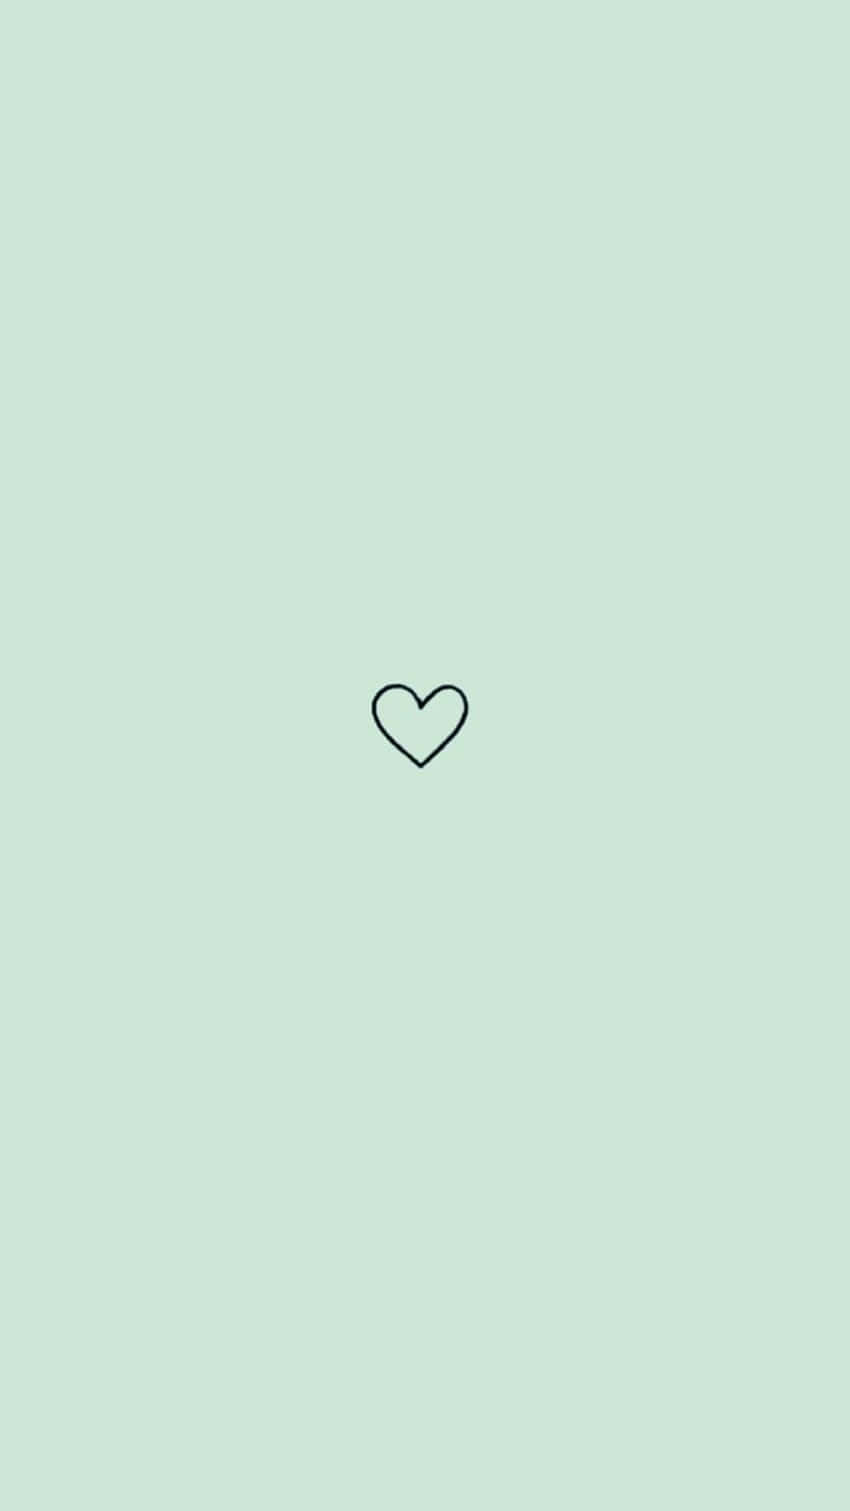 A Heart Icon On A Green Background Wallpaper